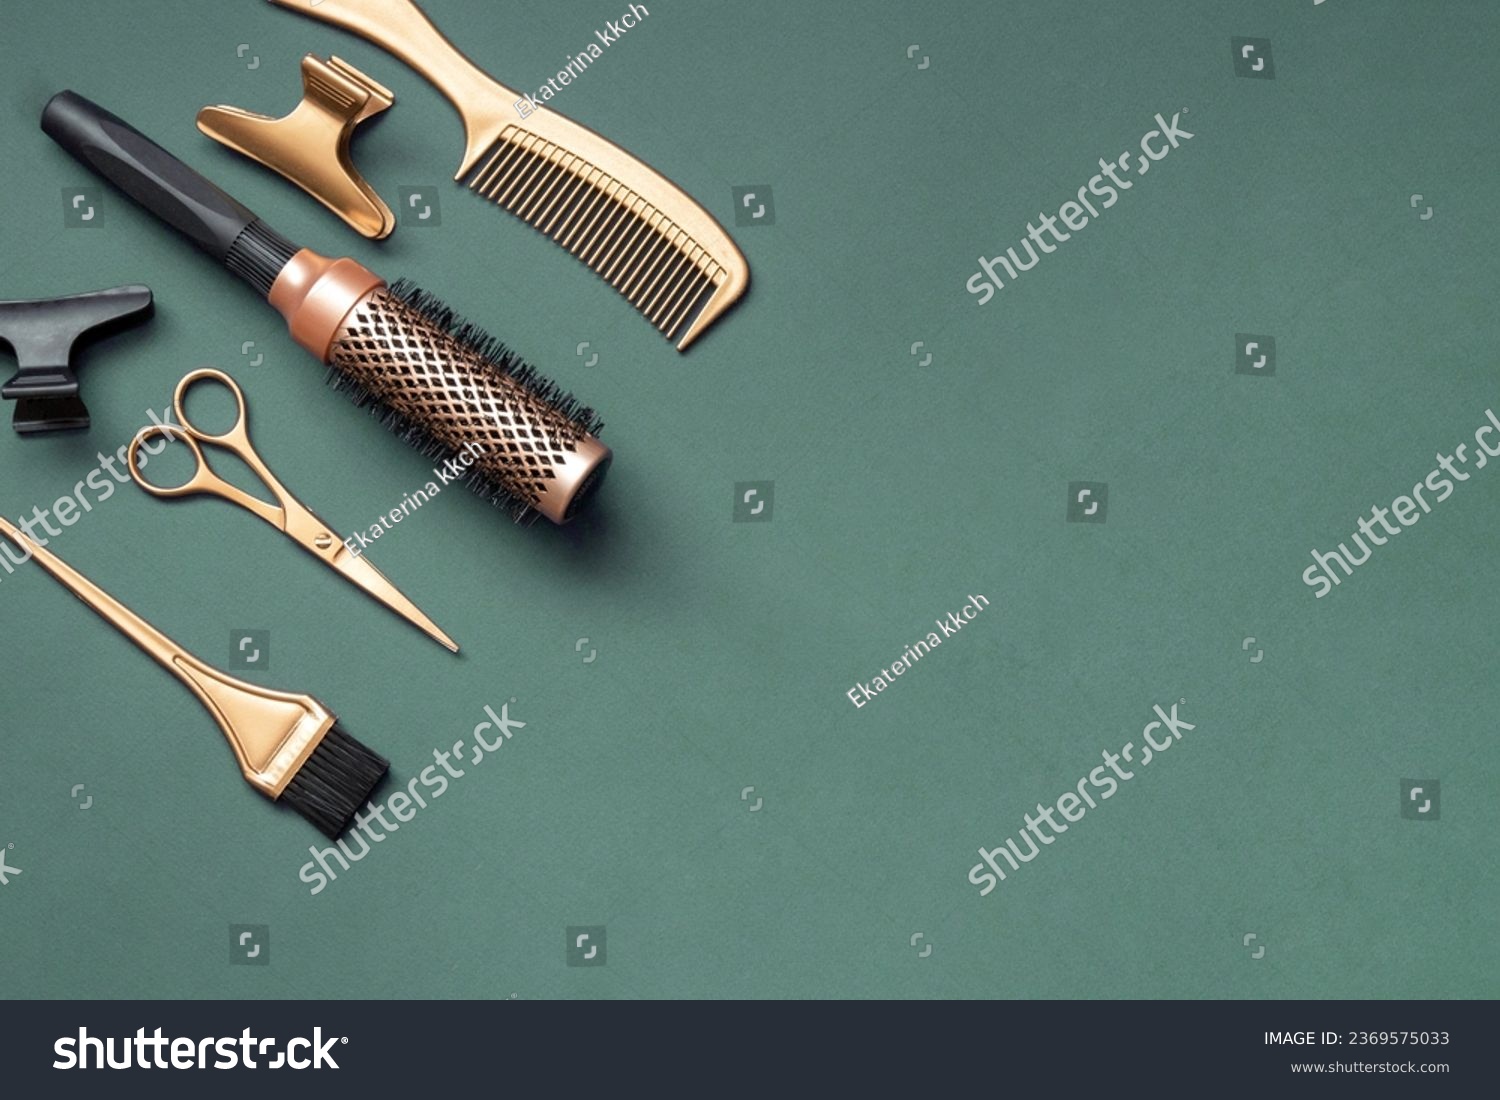 Golden hairdressing tools scissors combs on green background. Horizontal template with hair salon accessories and copy space. #2369575033